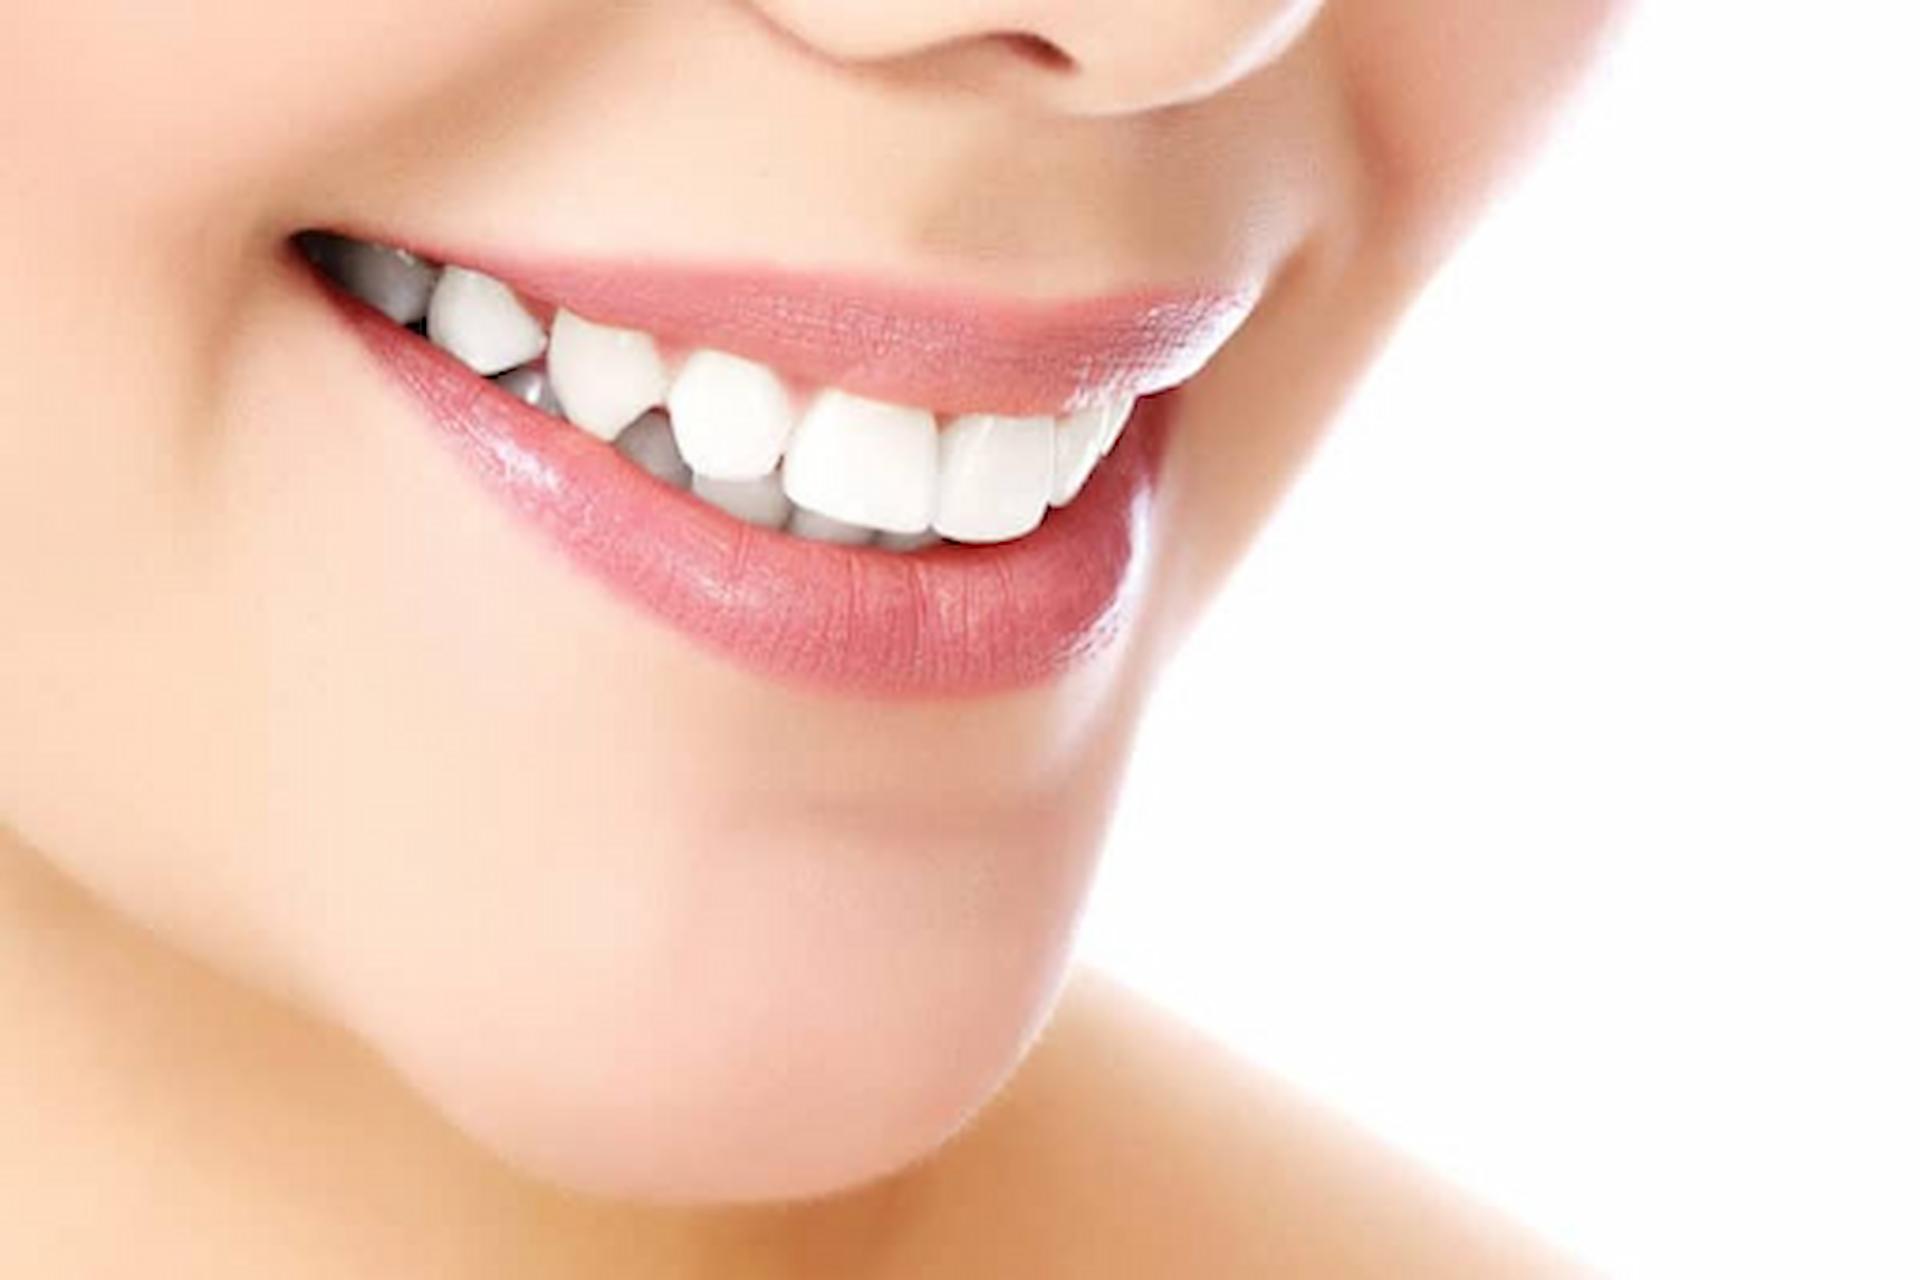 Essential Considerations Before Using Whitening Strips